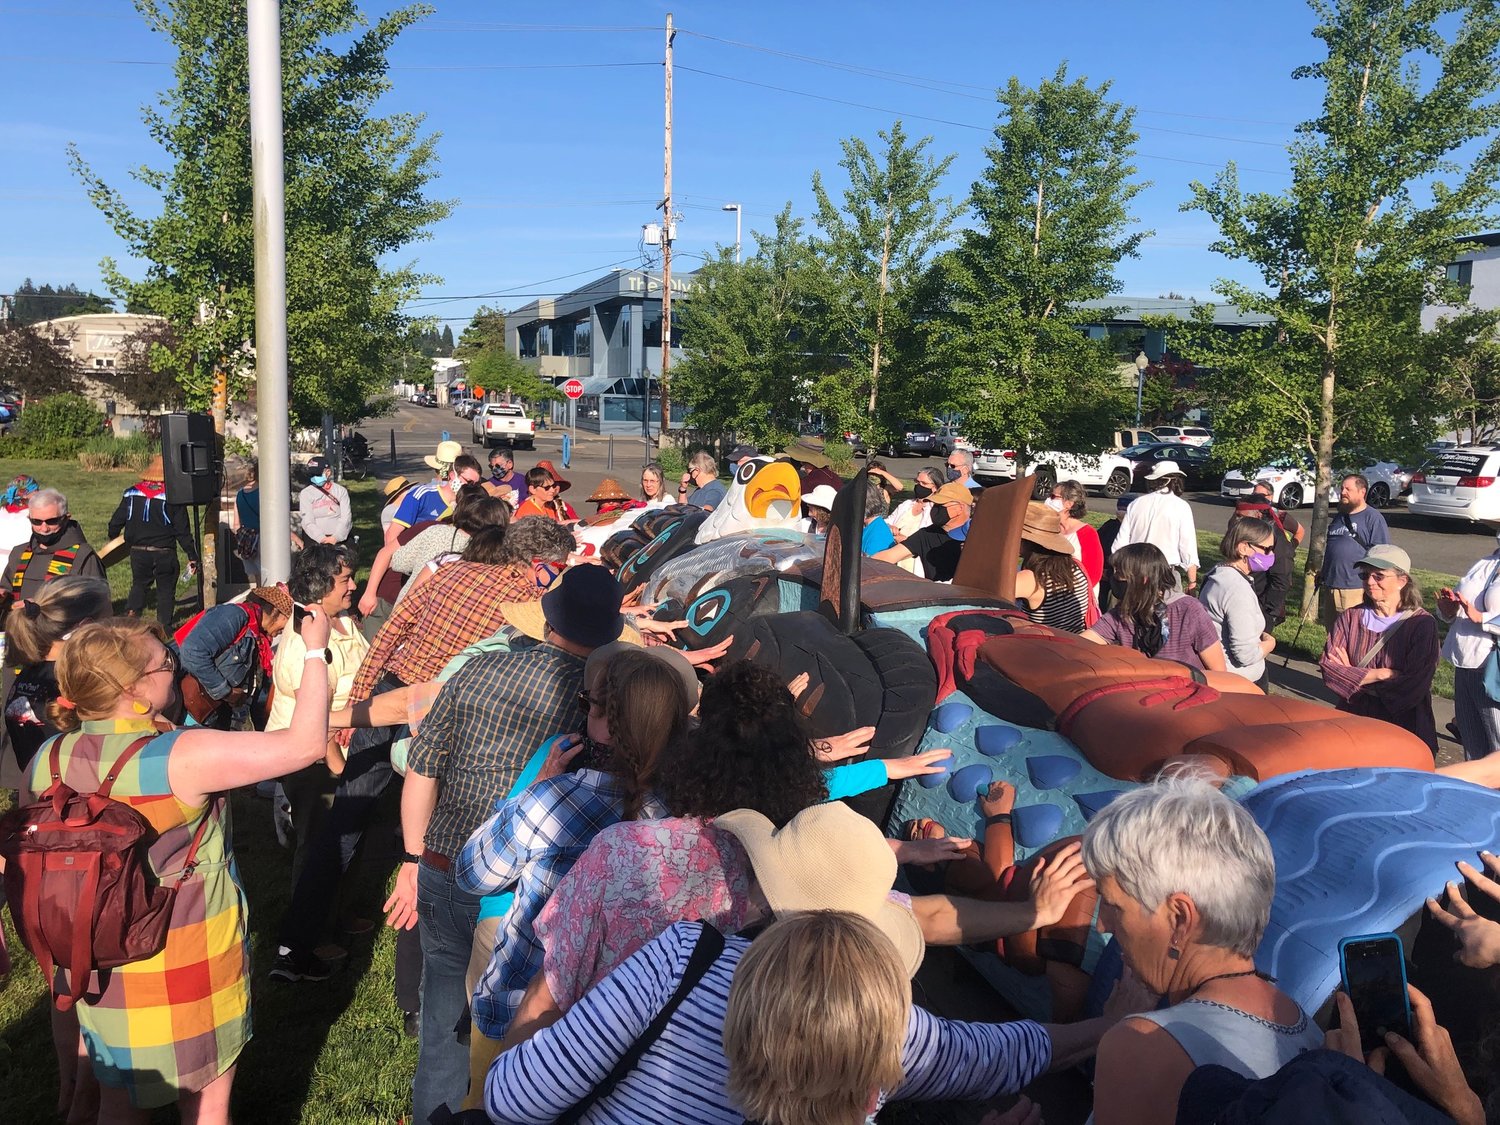 Dozens of people were able to touch the new totem pole during a dedication blessing in Olympia on May 15, 2021.